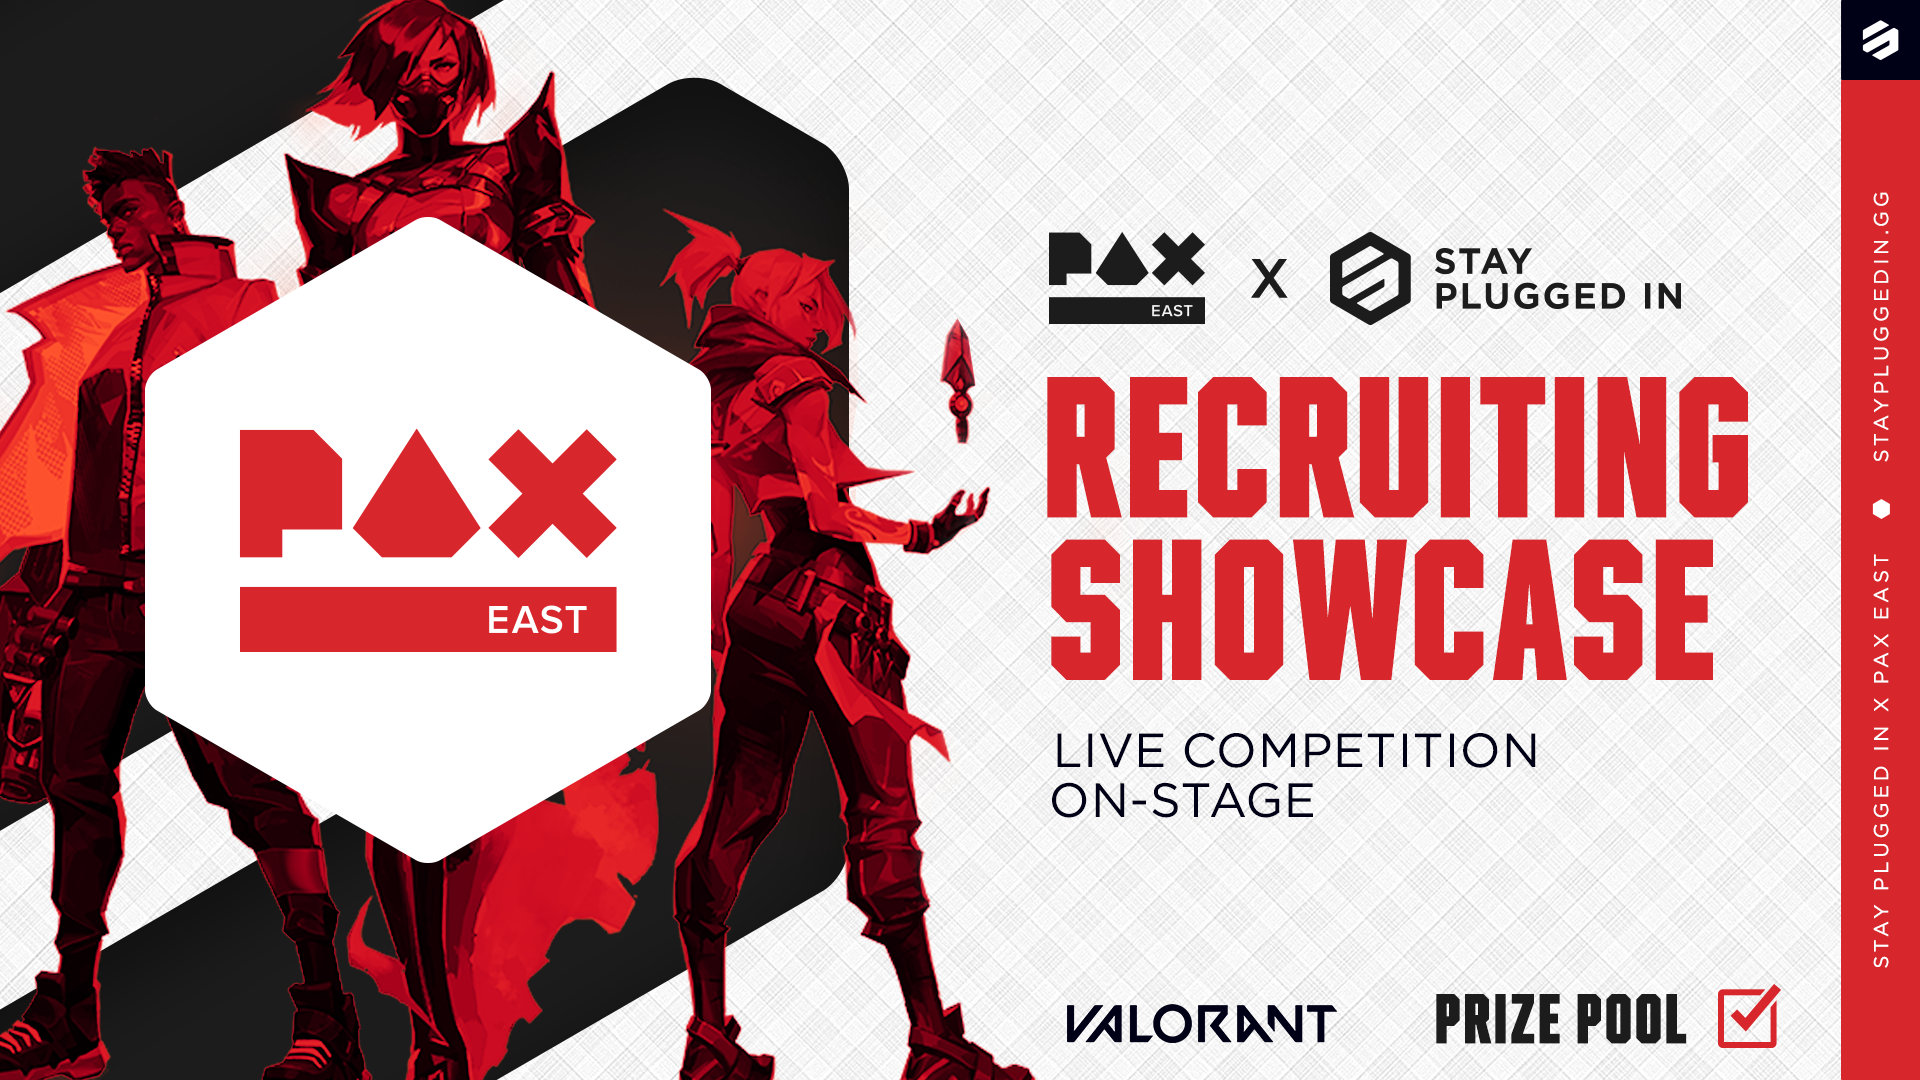 Recruiting Showcase at PAX East